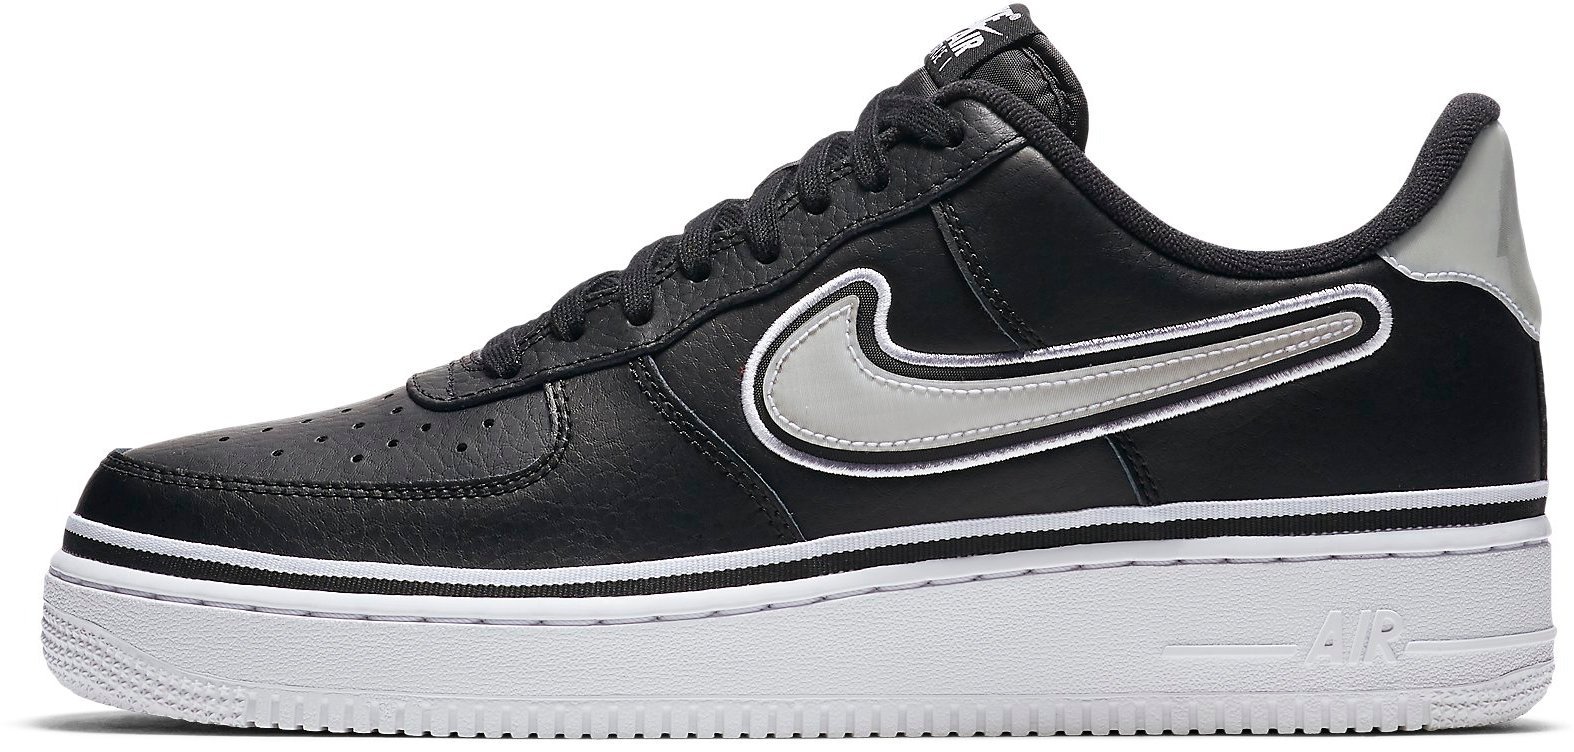 Shoes Nike AIR FORCE 1 '07 LV8 SPORT